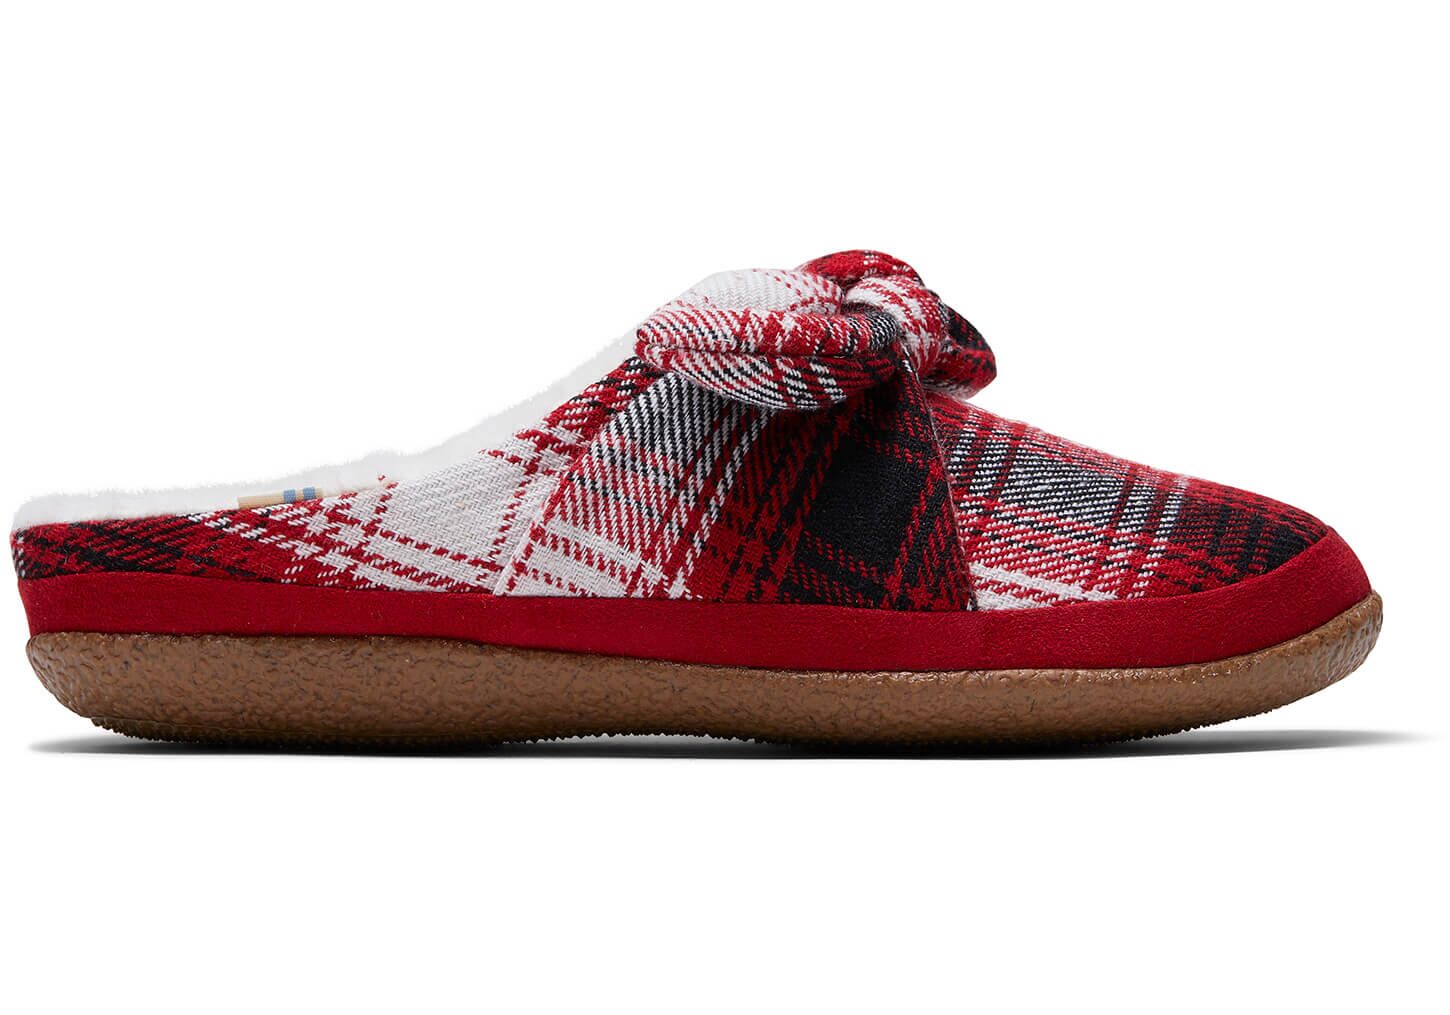 TOMS Women's Ivy Red Plaid Bow Slippers 